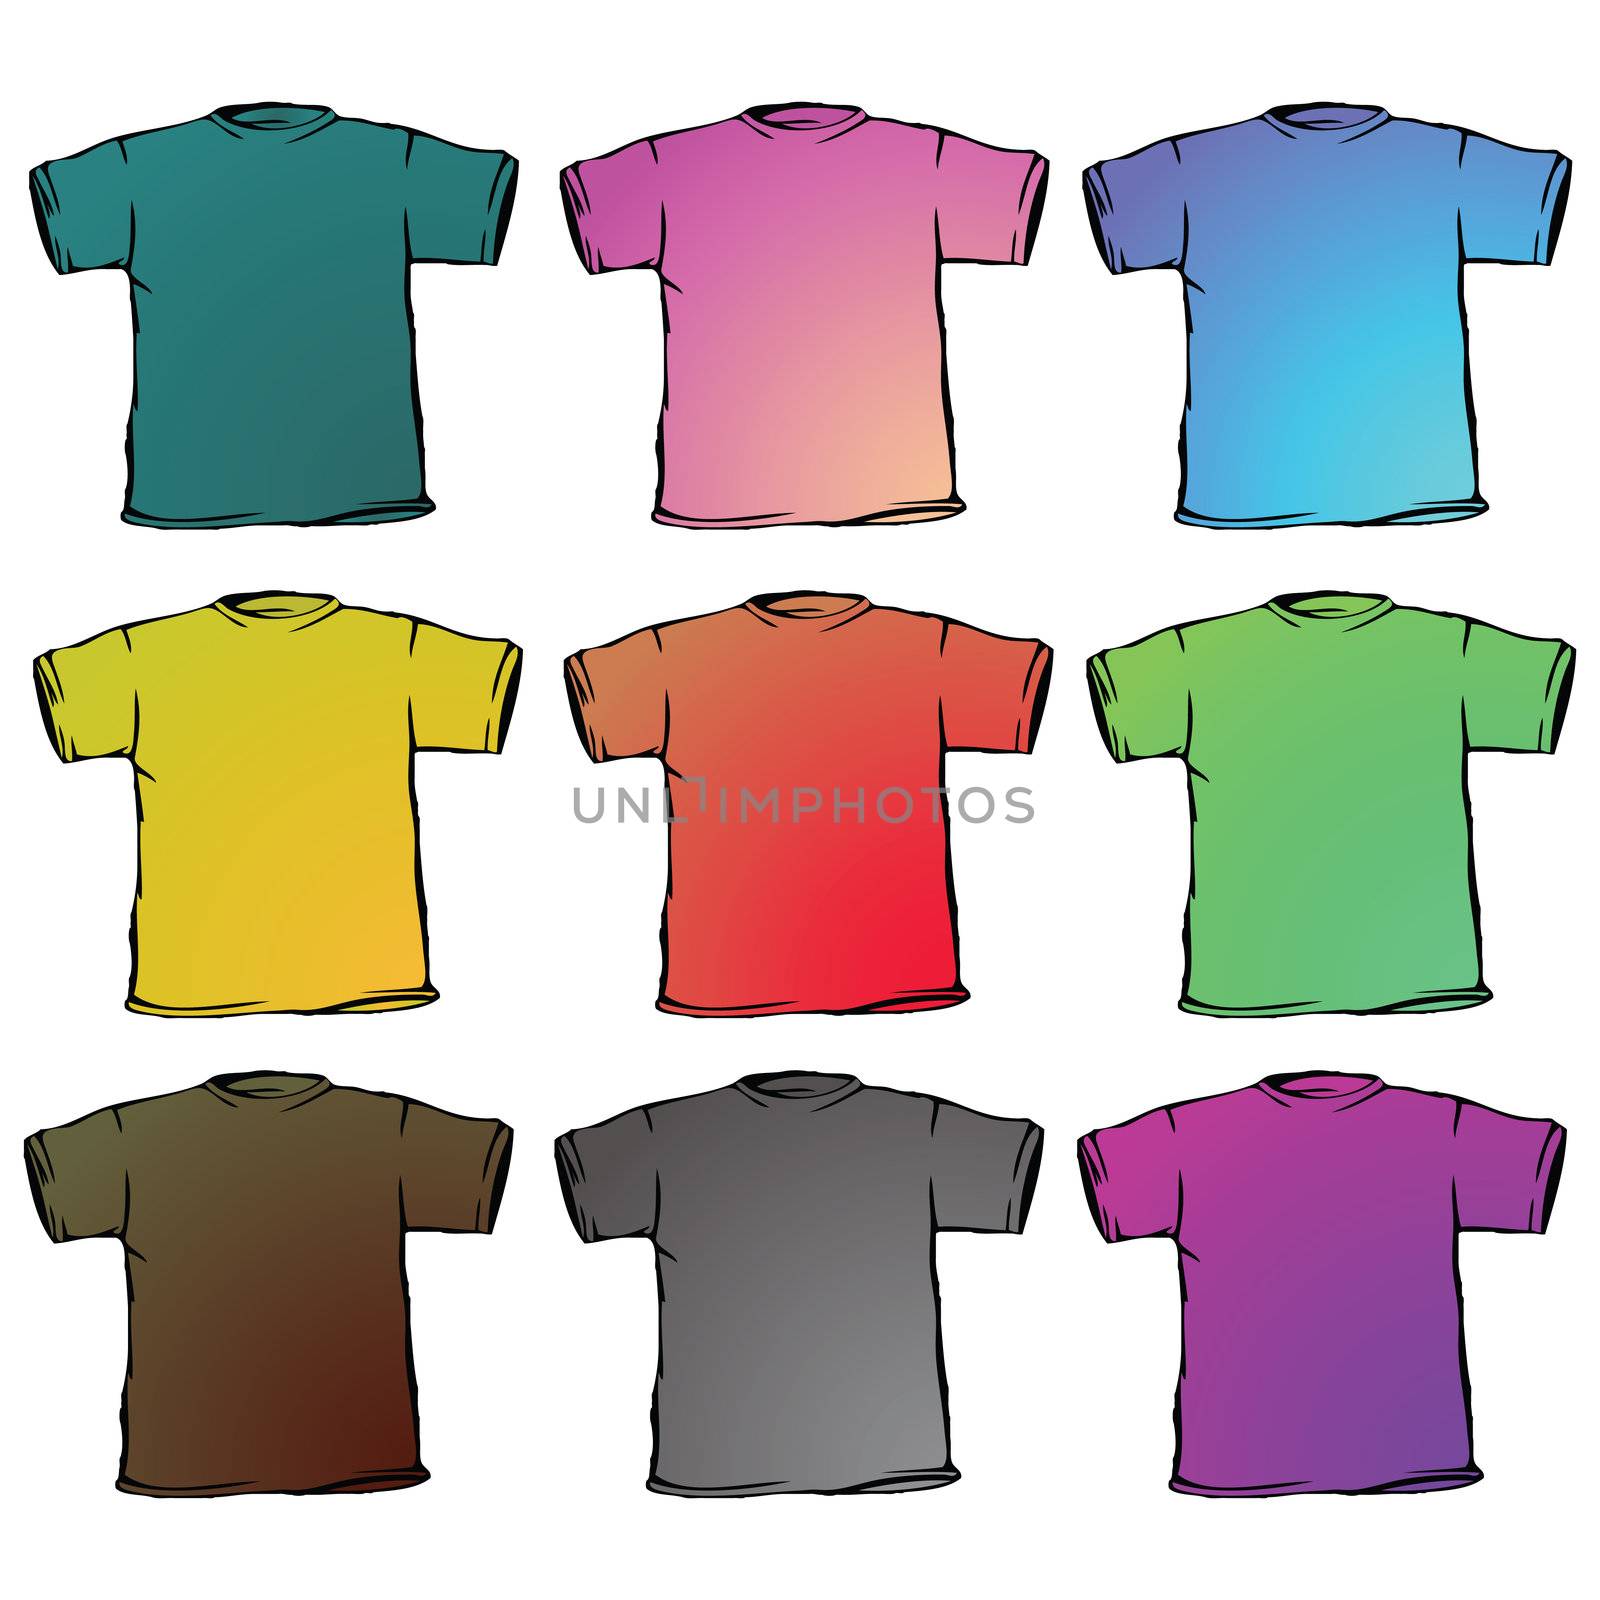 t shirts collection against white background, abstract vector art illustration